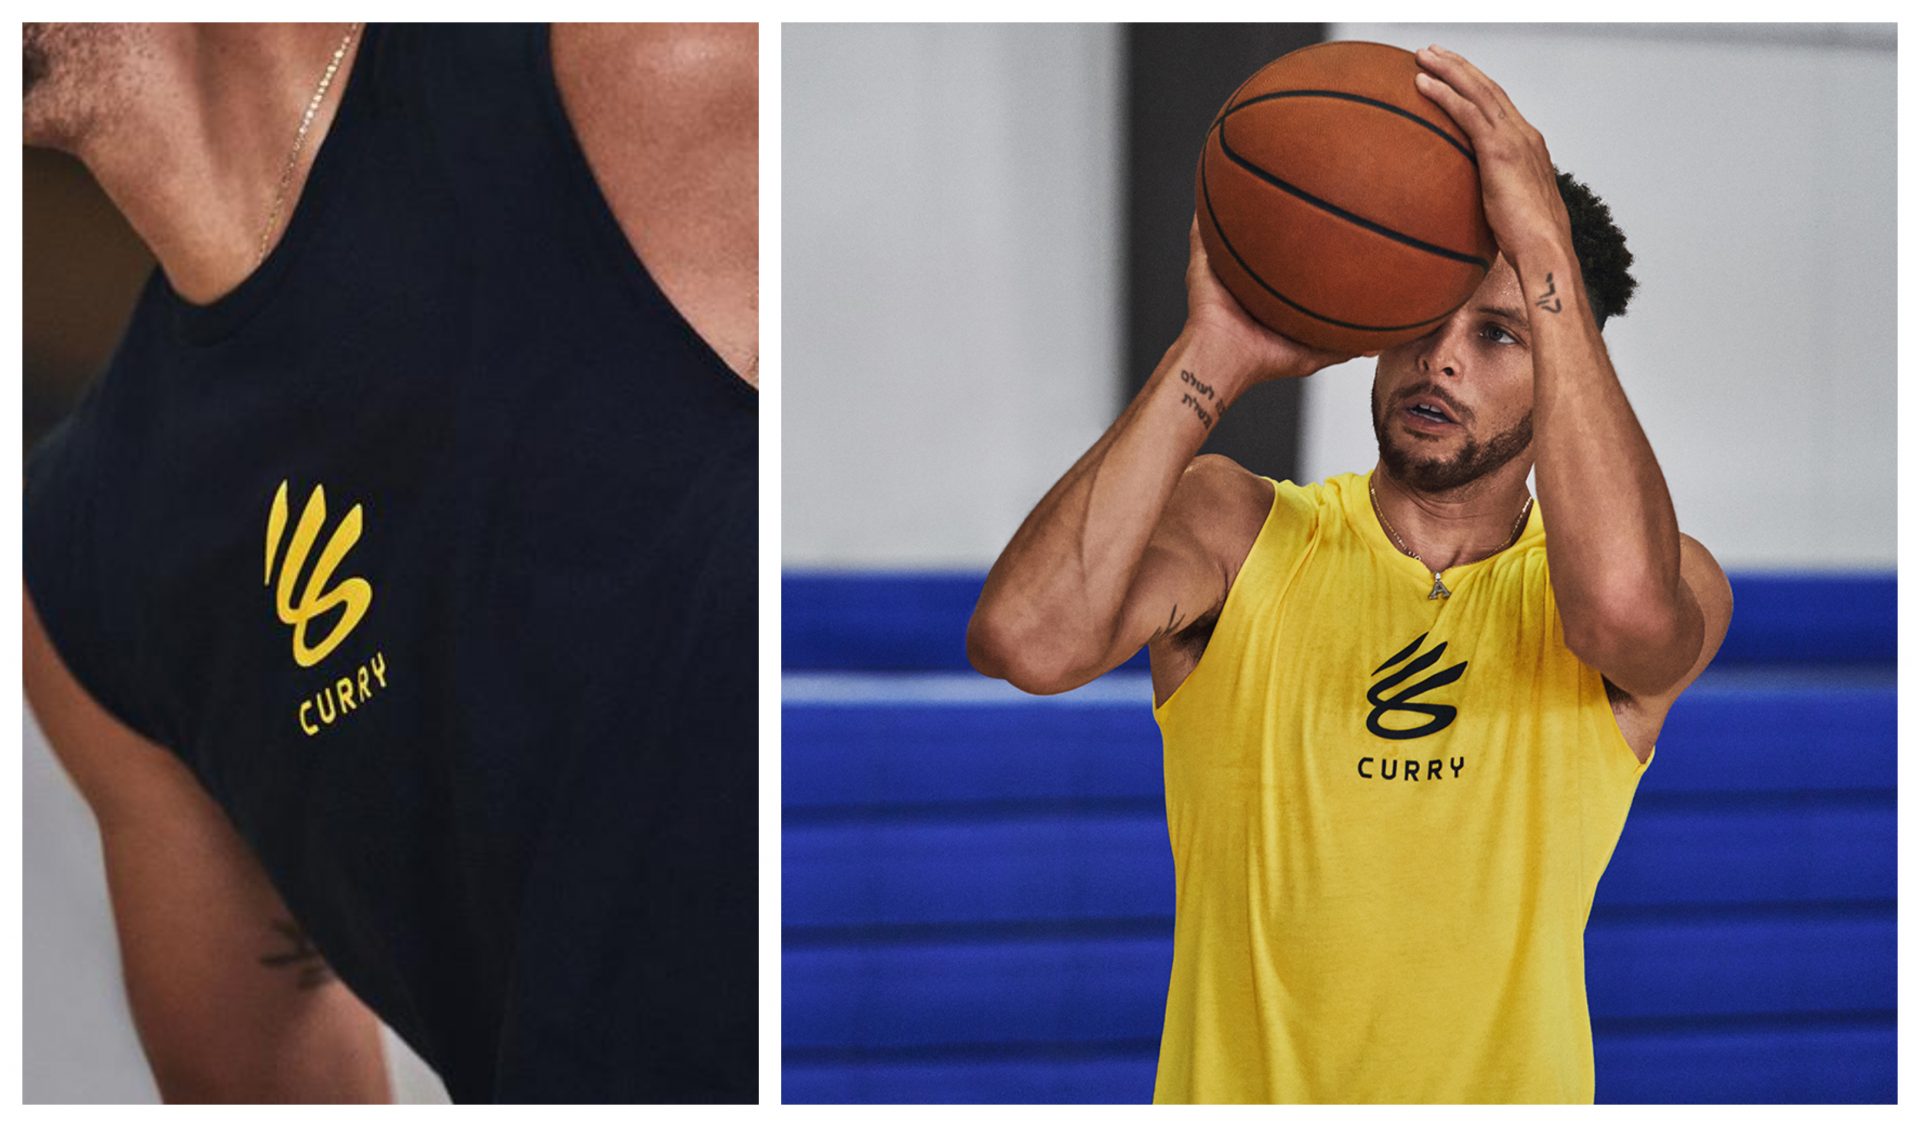 Curry Brand is on the verge to launch. (HypeBeast/NBC)